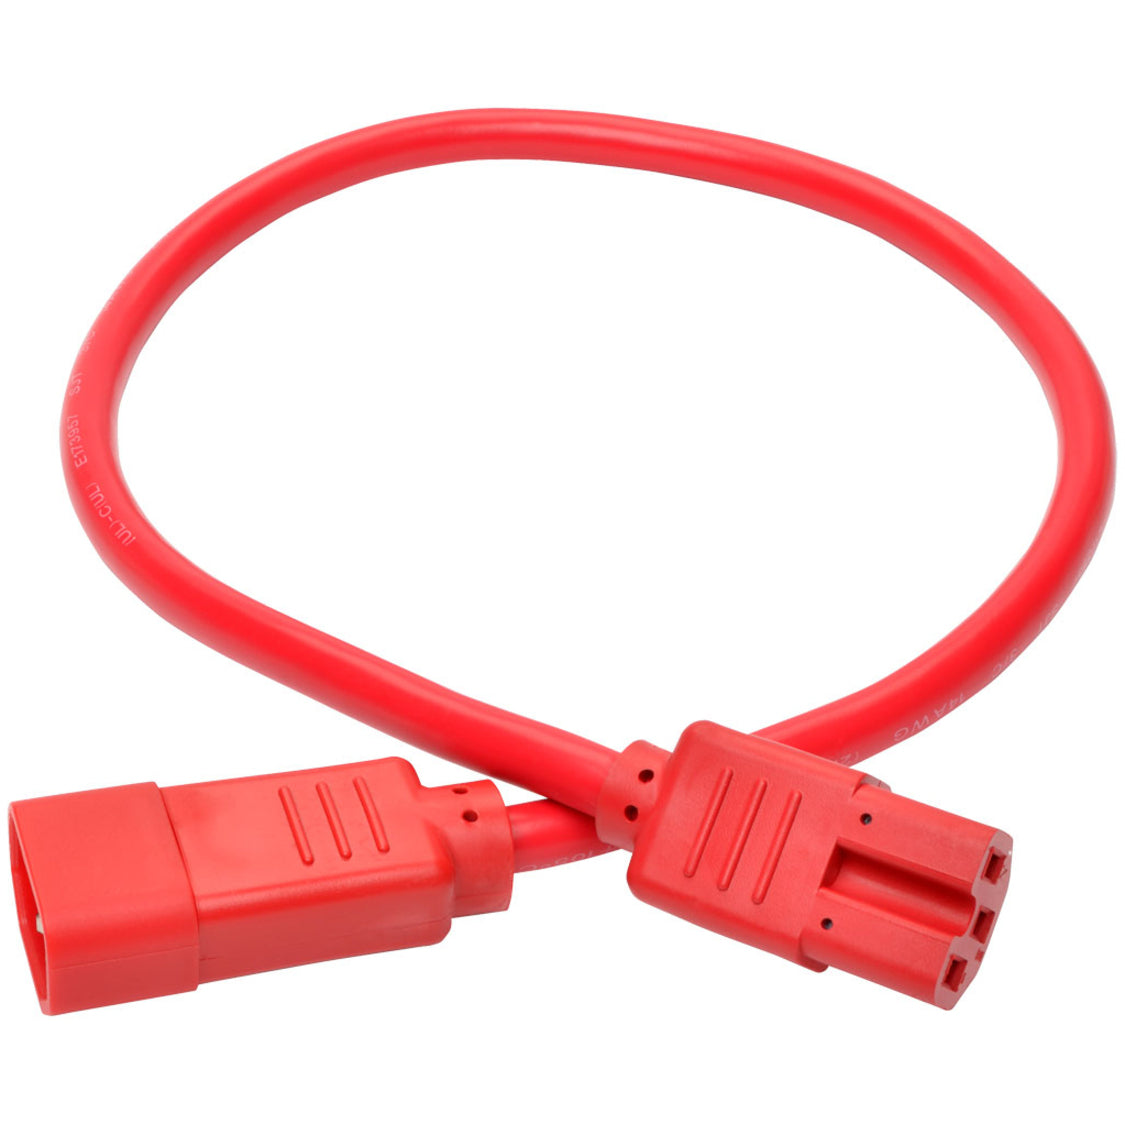 Tripp Lite by Eaton Heavy-Duty Computer Power Cord, 15A, 14 AWG (IEC-320-C14 to IEC-320-C15), Red, 2 (P018-002-ARD)